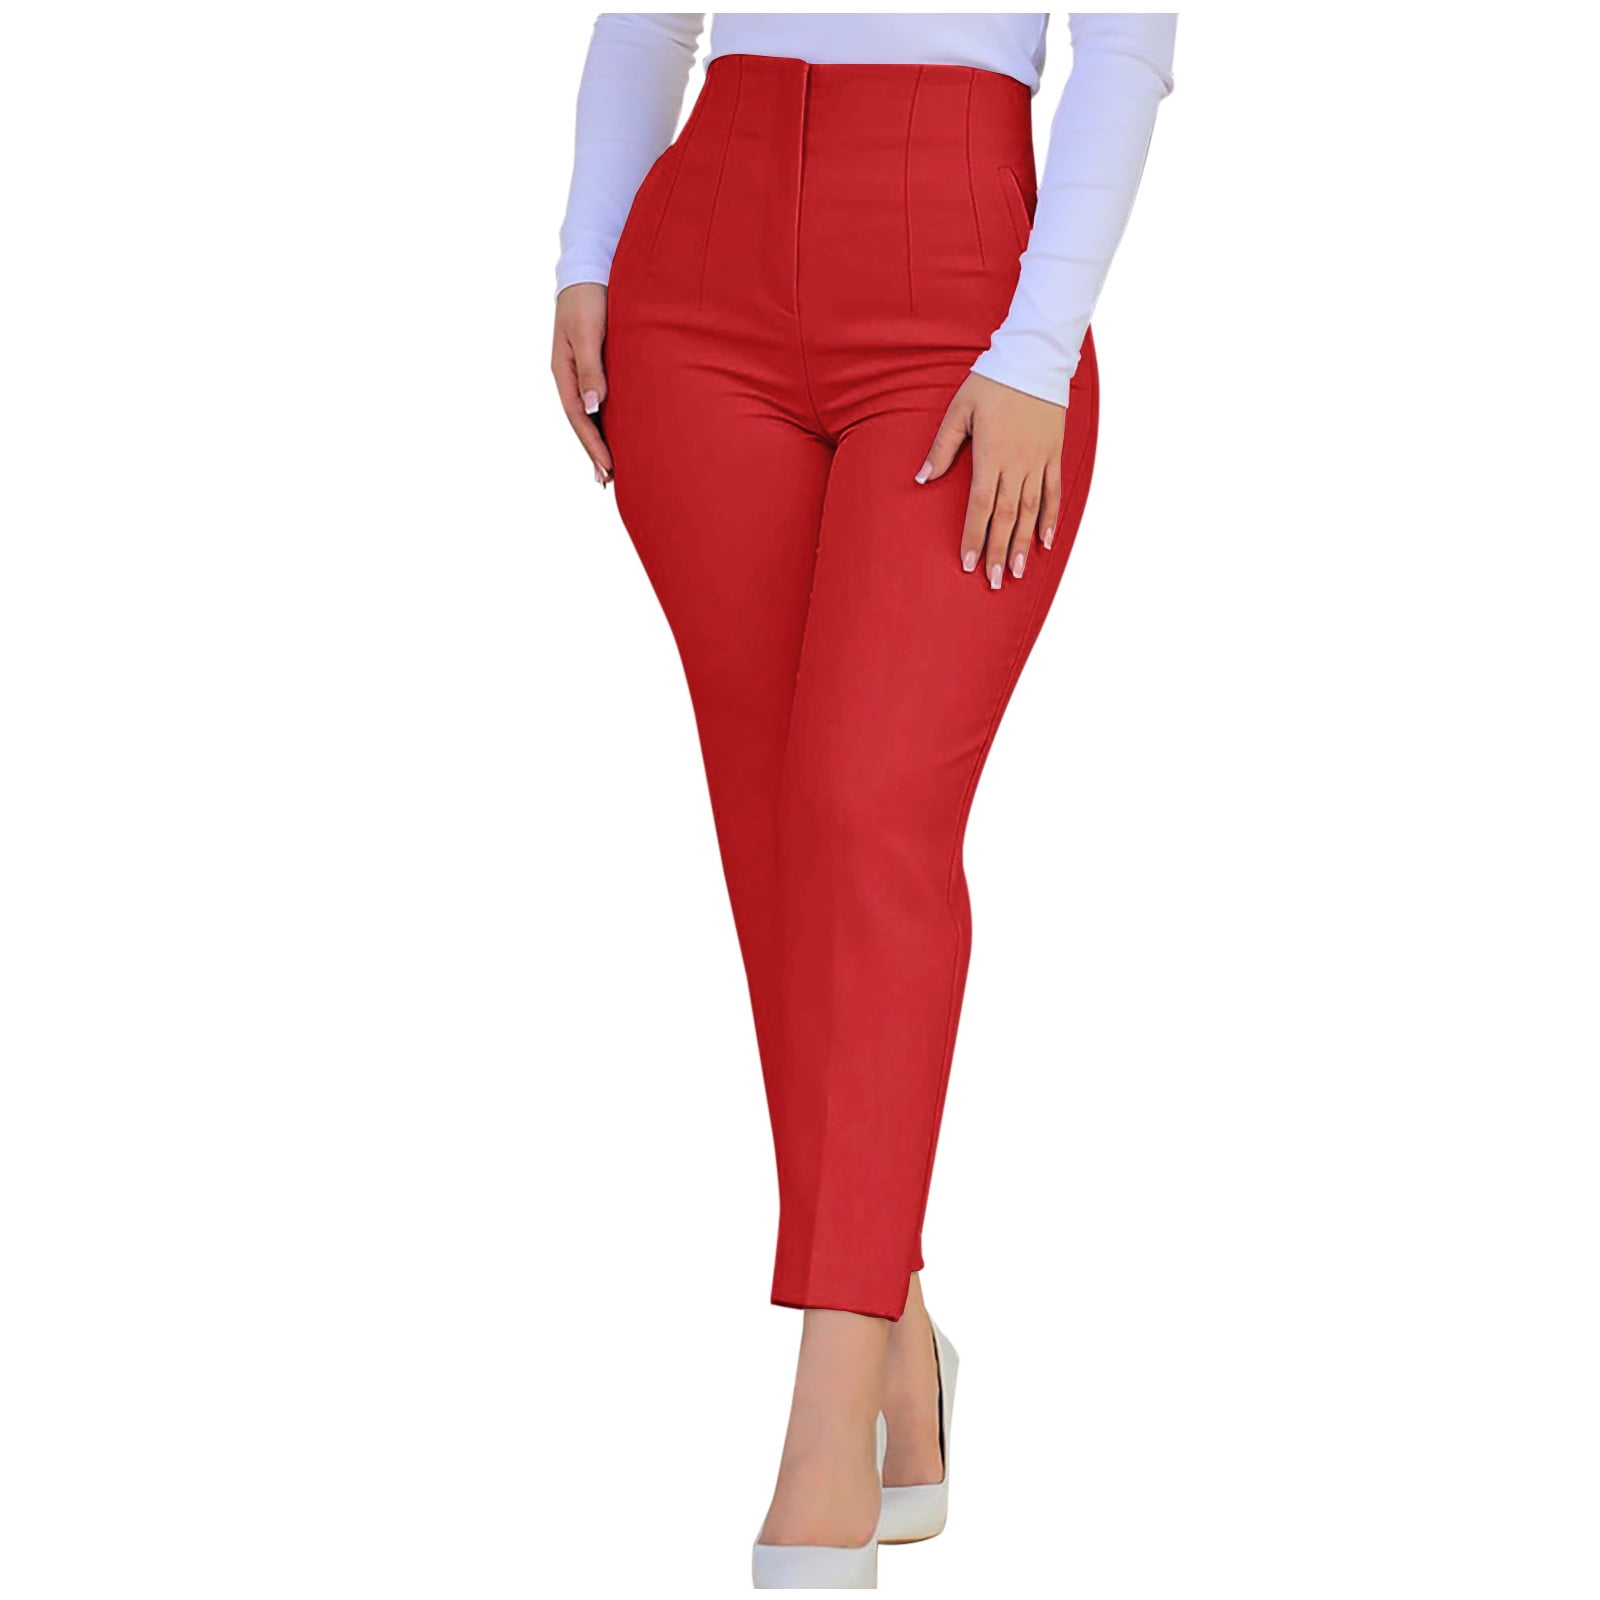 TRAF Women Pants High waist Trousers Office Wear for Women Professional  Autumn Cropped Pants Office outfits Women's Formal Pants